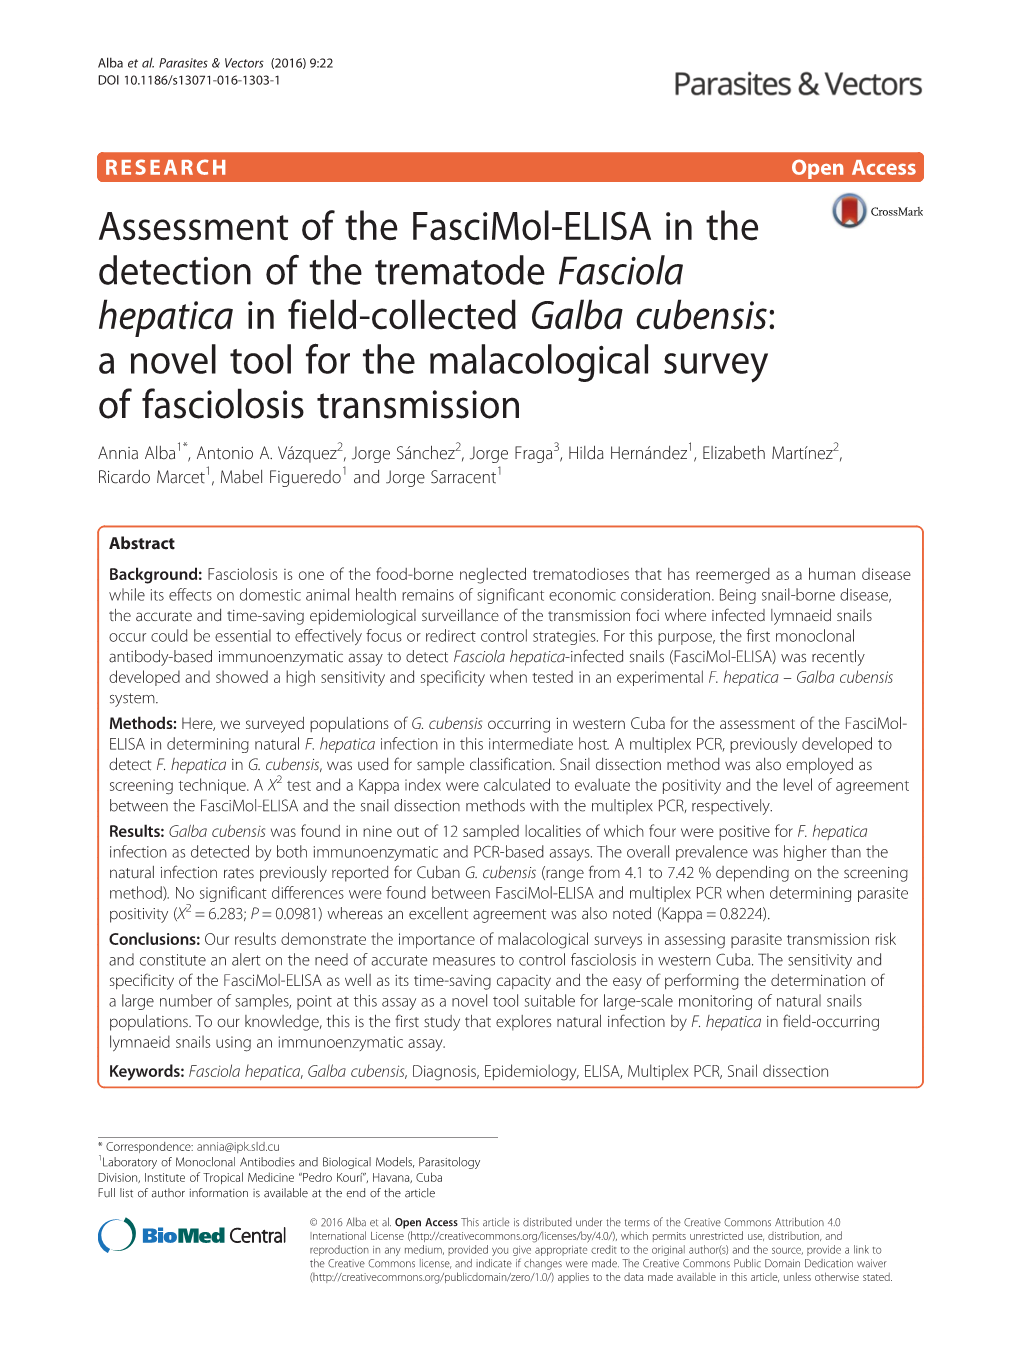 Assessment of the Fascimol-ELISA in the Detection of the Trematode Fasciola Hepatica in Field-Collected Galba Cubensis